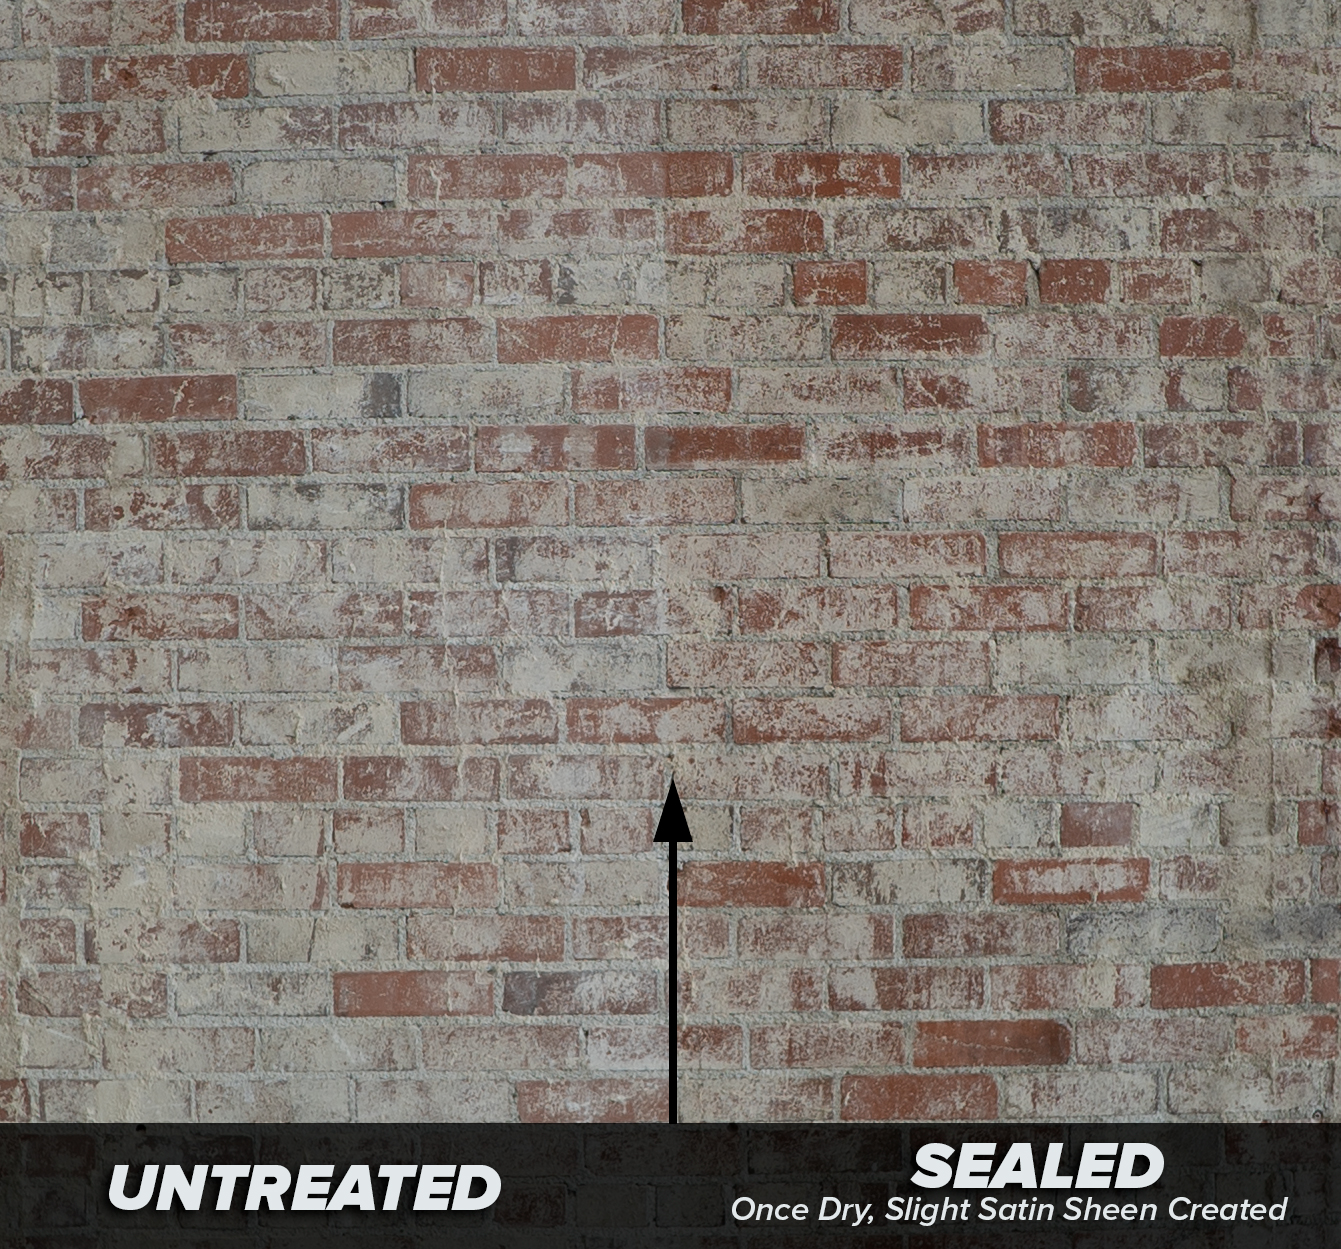 Integration Possible Can be ignored Water-Resistant Interior/Exterior Brick Sealer - Masonry Defender